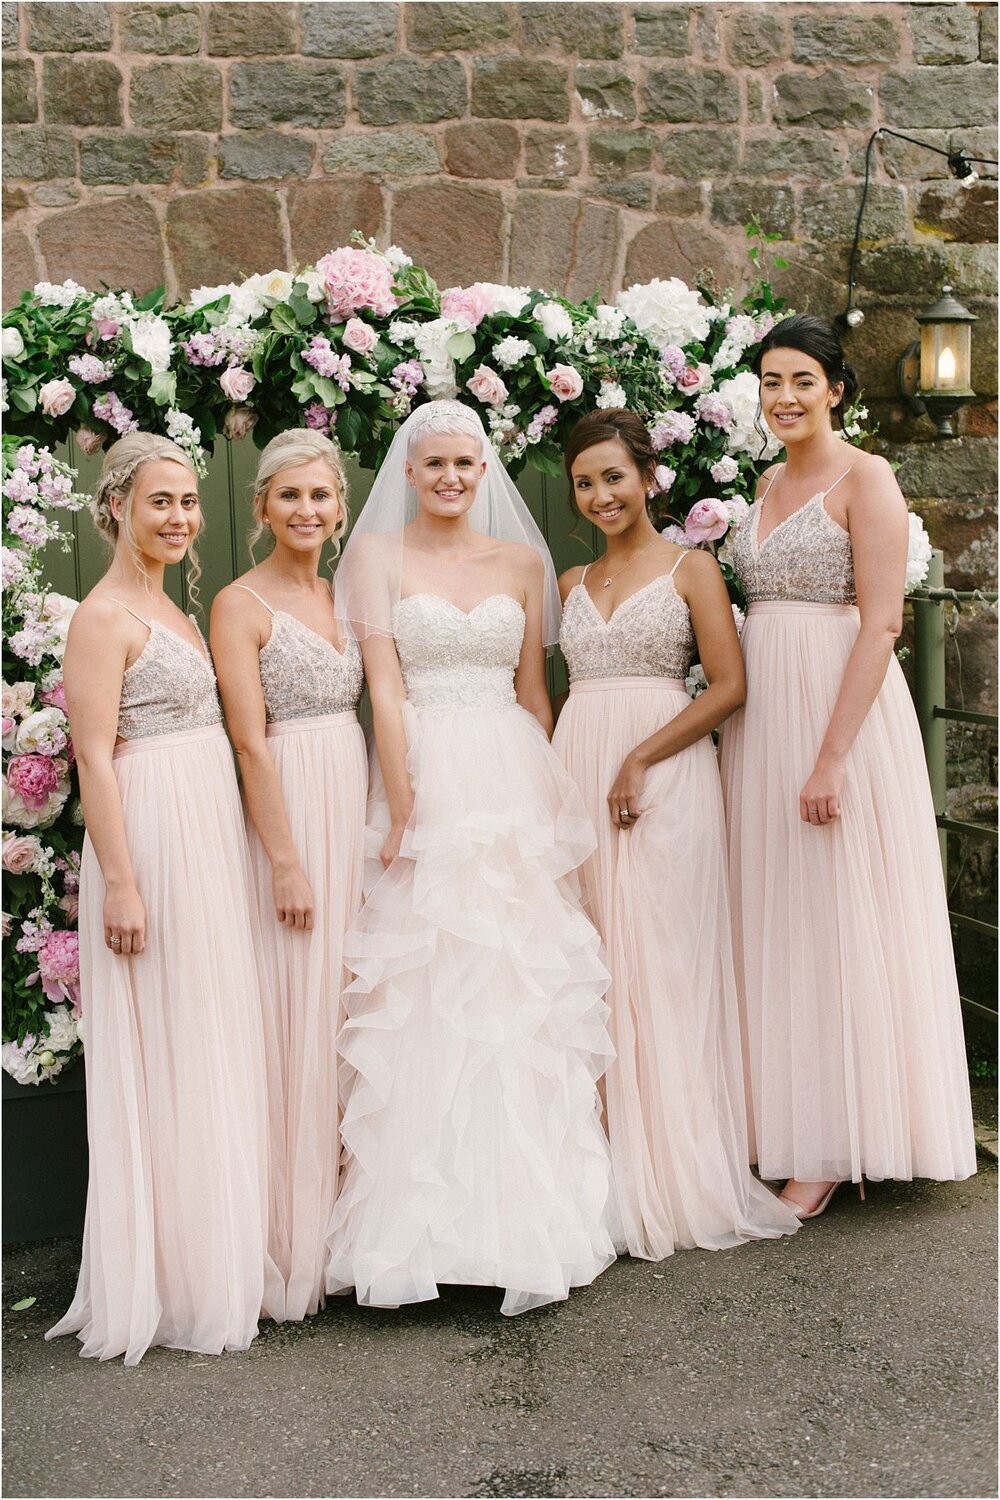  Bride and bridesmaids during a wedding at The Ashes Barns in Staffordshire in England 